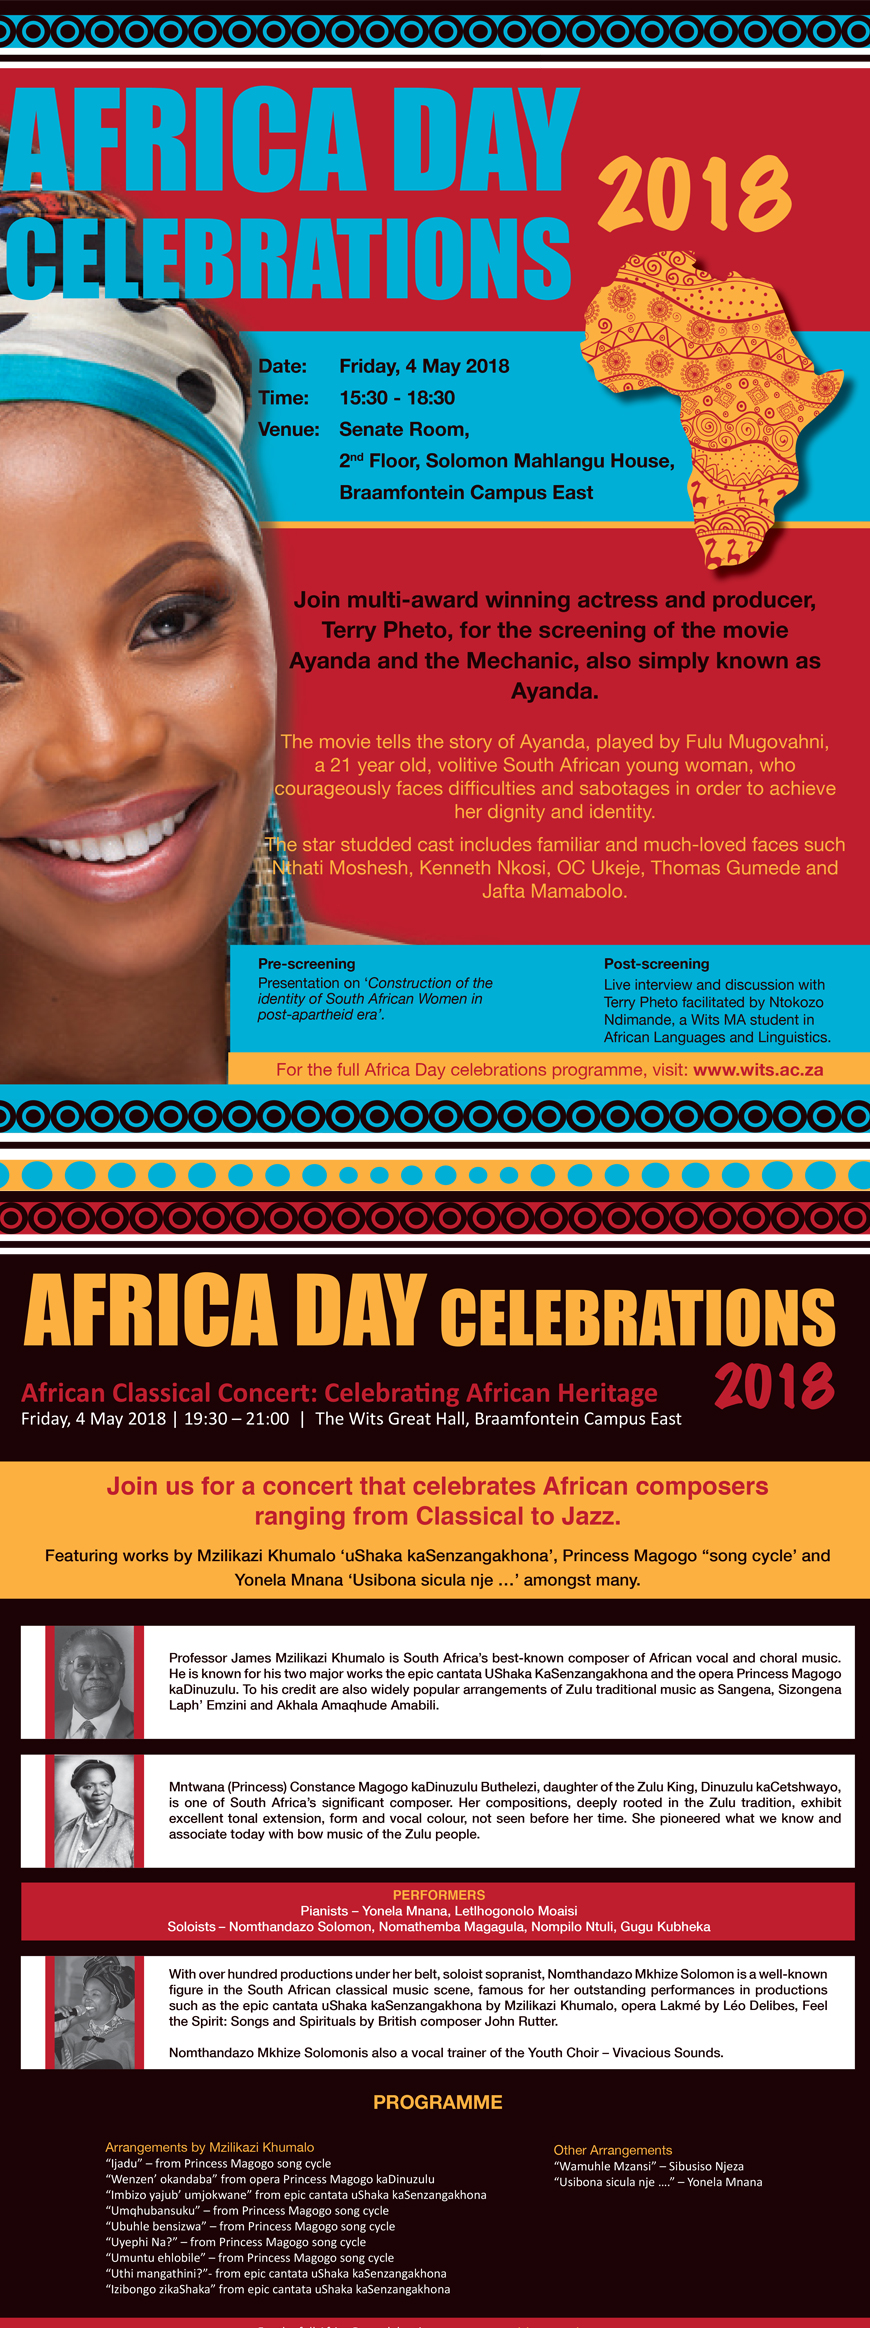 Africa Day 2018 Concerts and Film Screening